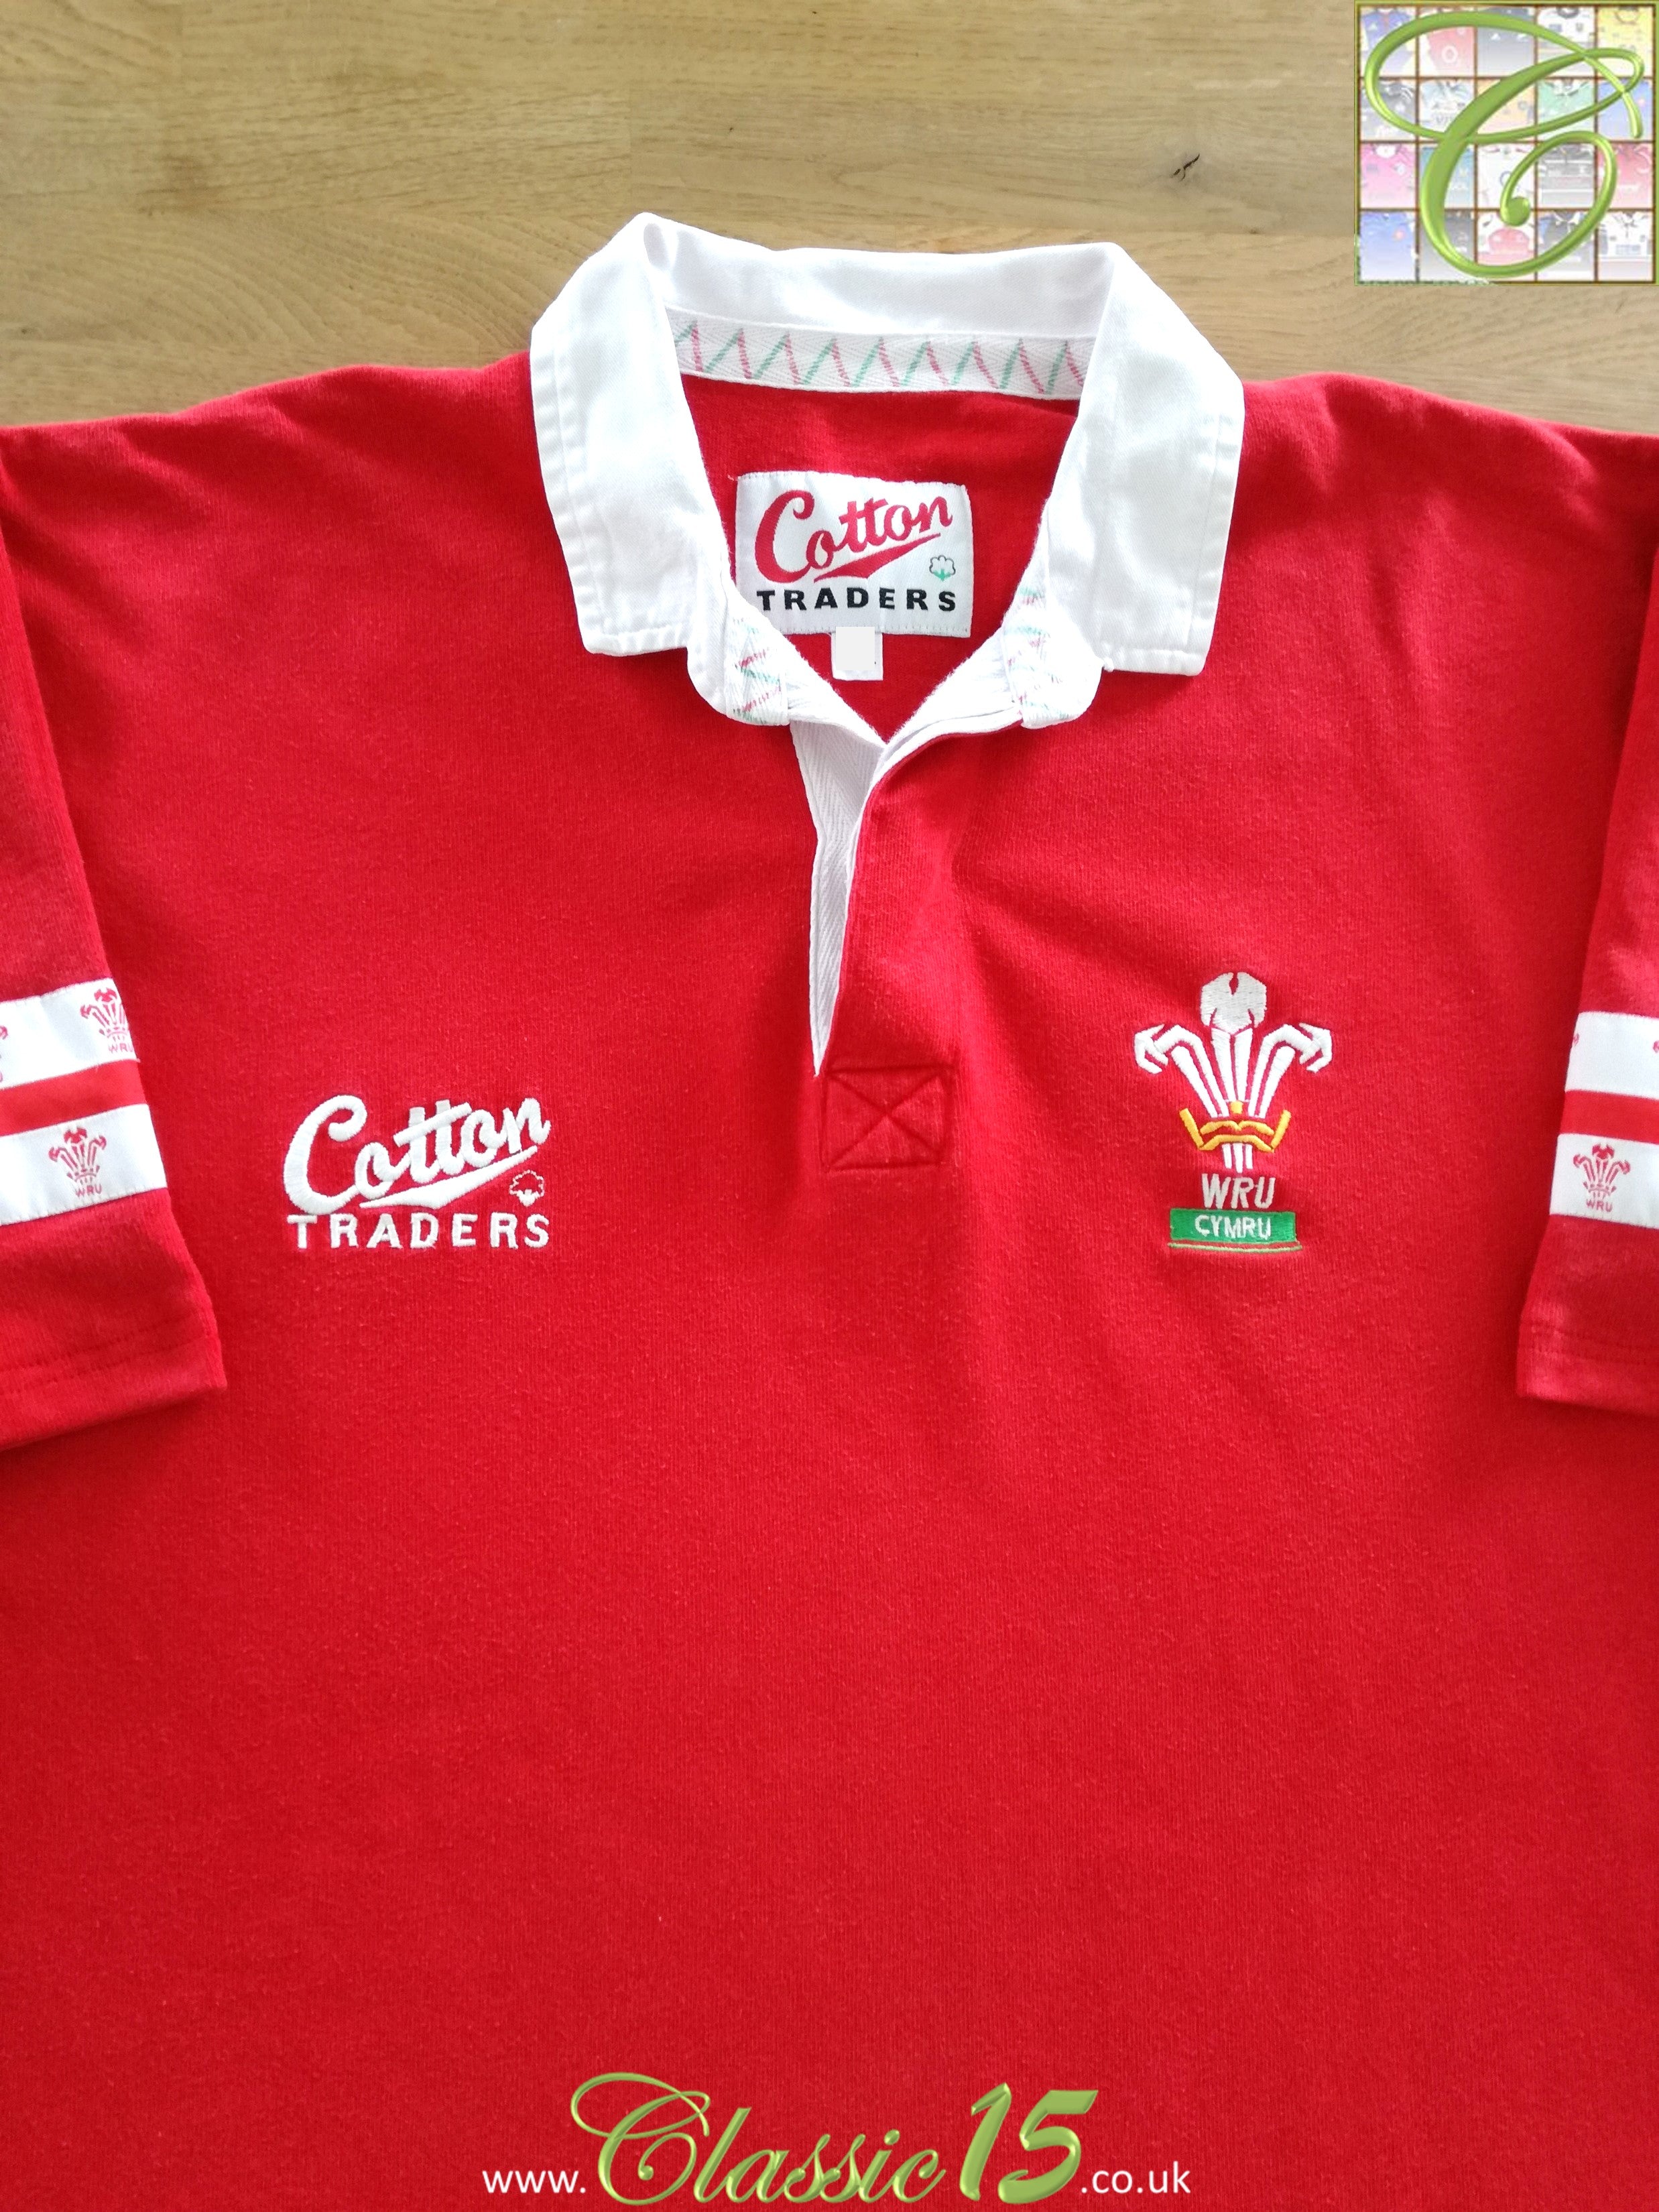 Classic Rugby Shirts | Vintage Rugby Shirts